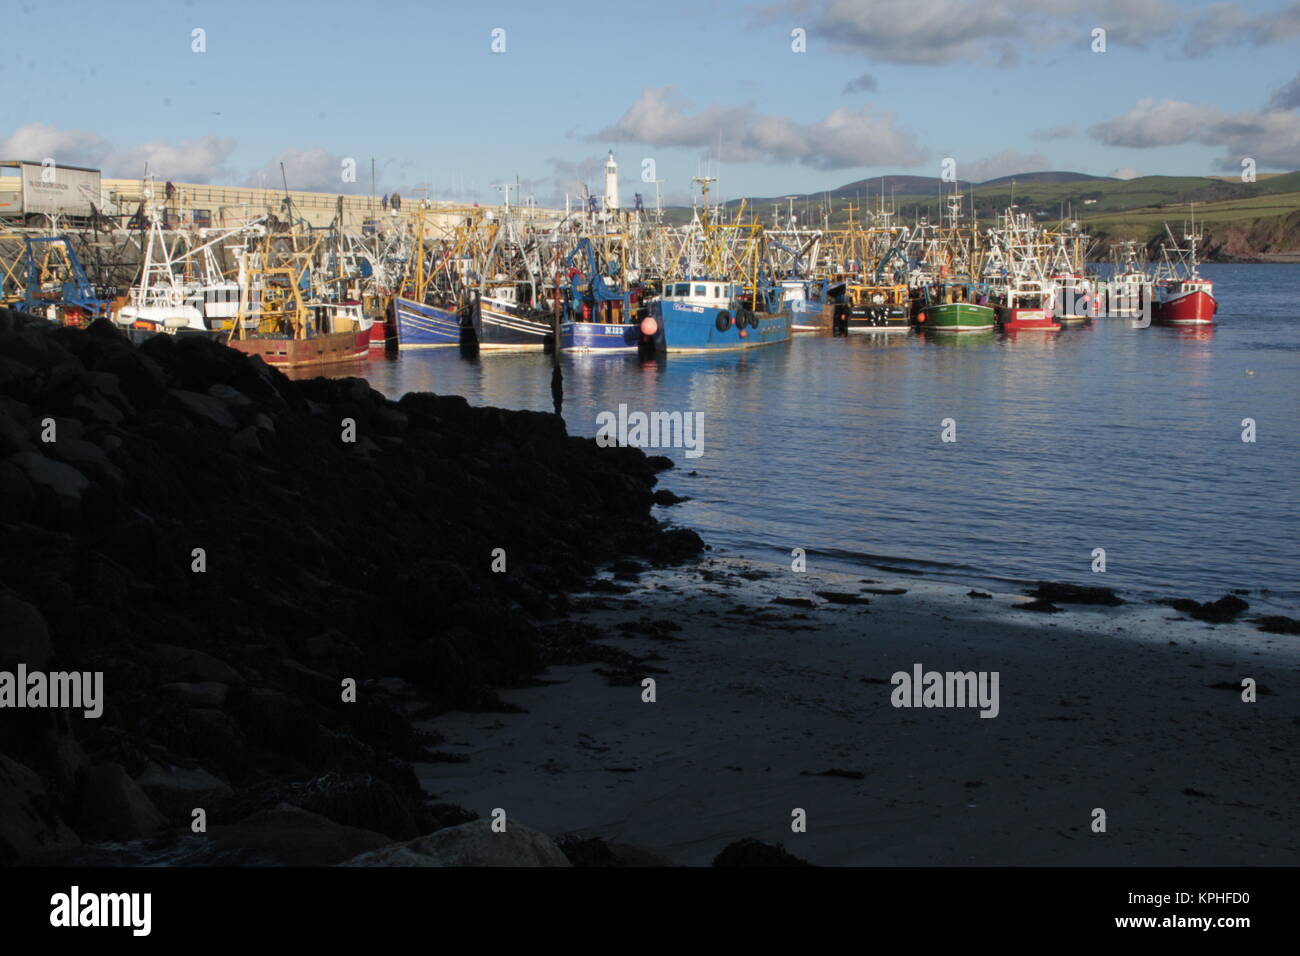 Trawler Fishing boats in Peel harbour, Isle of Man, United Kingdom. Fishing for Scallops (Queenies). Strict quotas mean the boats return to harbour. Stock Photo